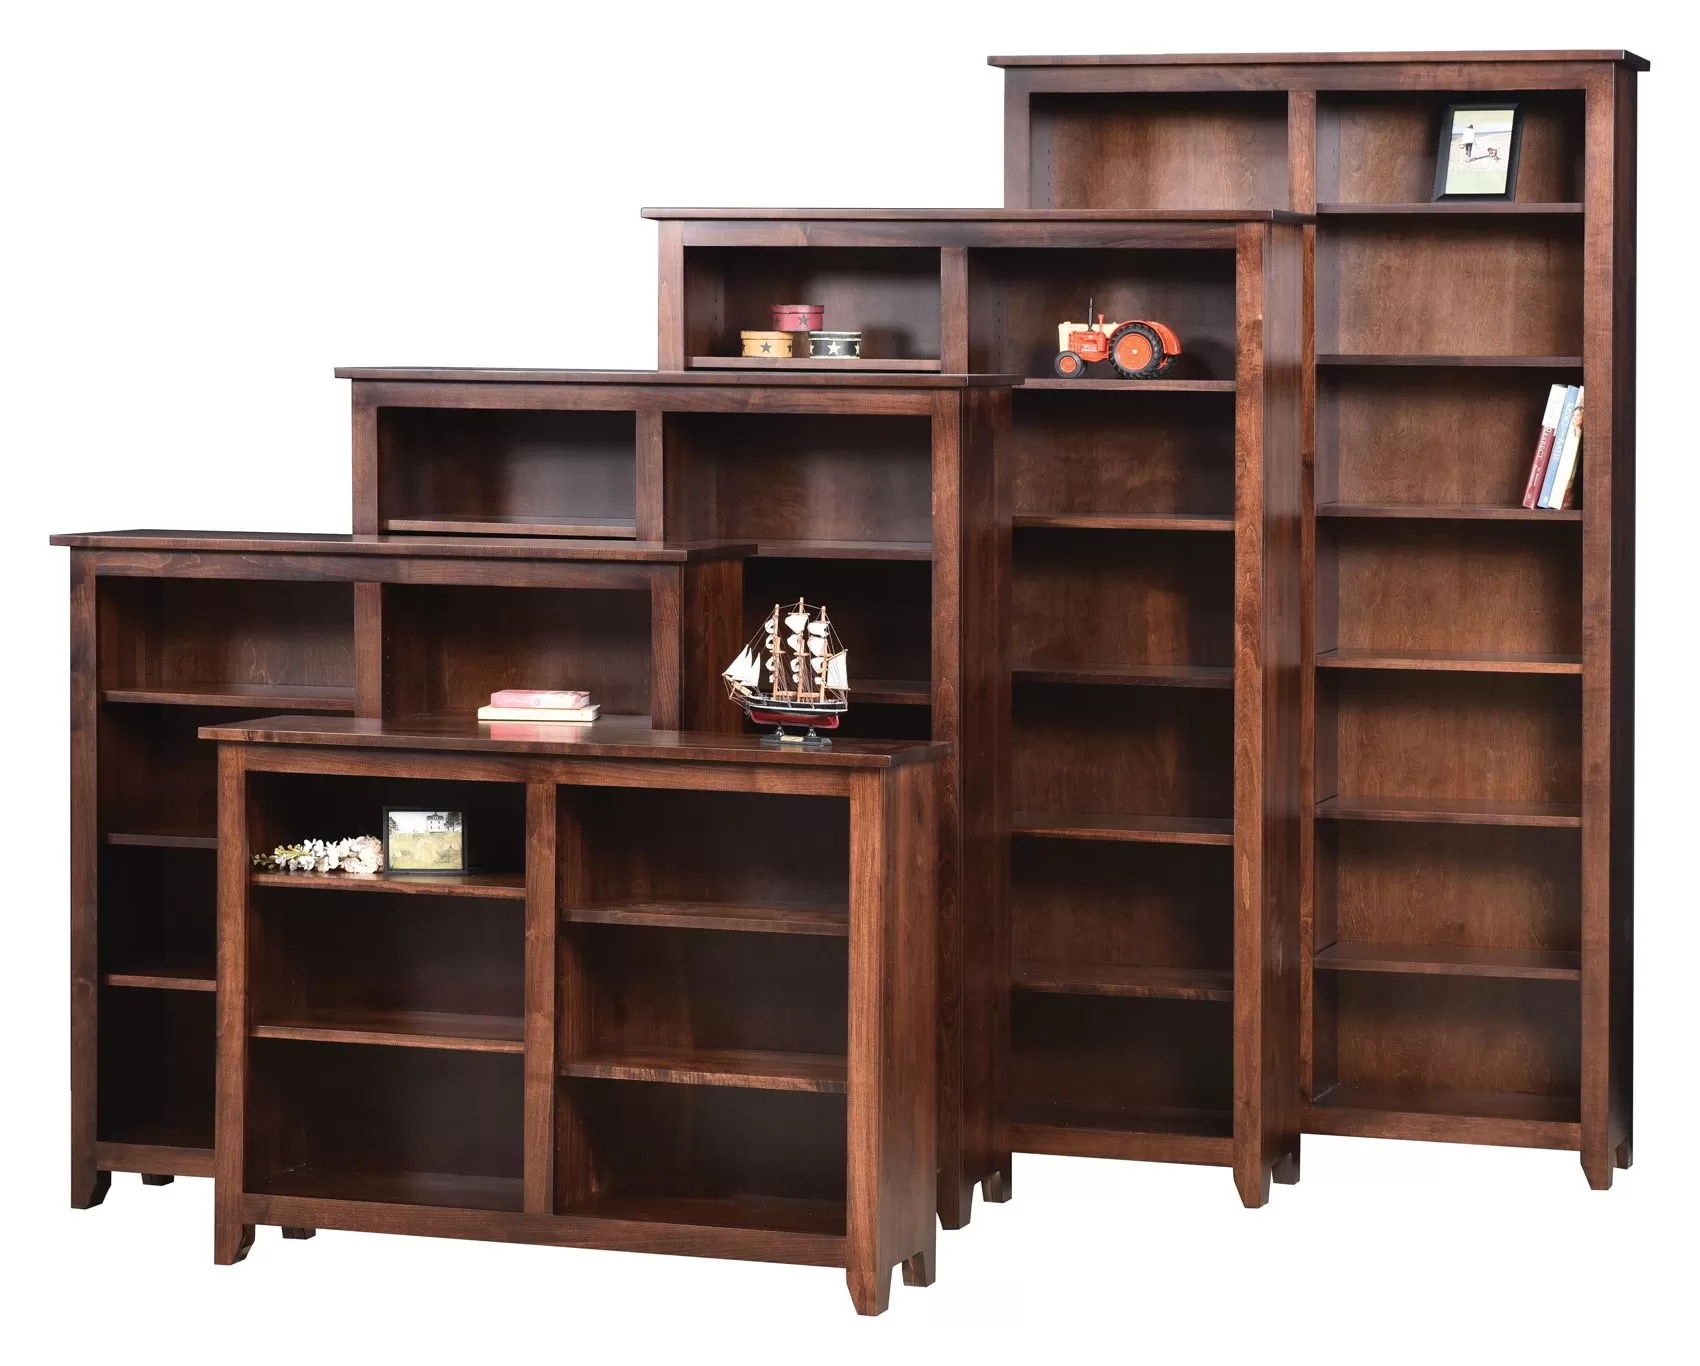 48" Modern Mission Open Bookcases